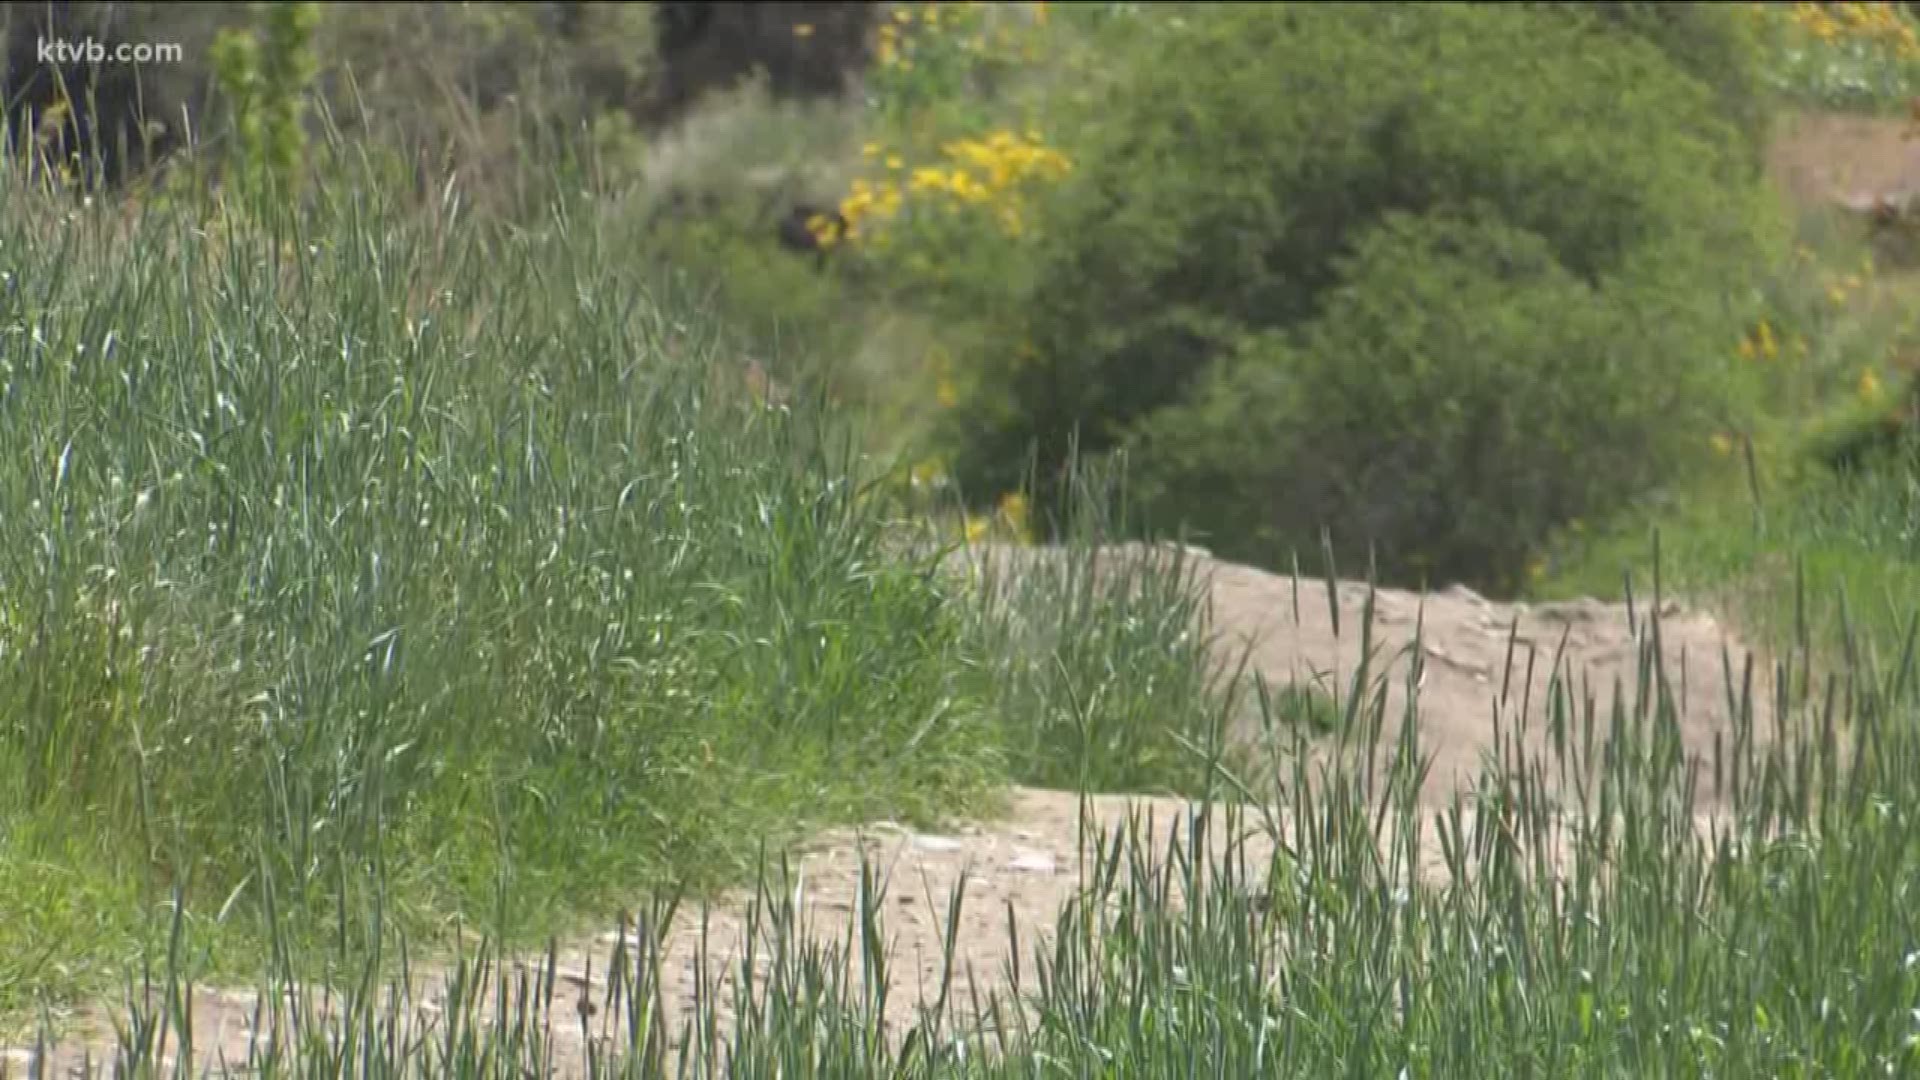 Officials warn people using the foothills to be on the lookout.